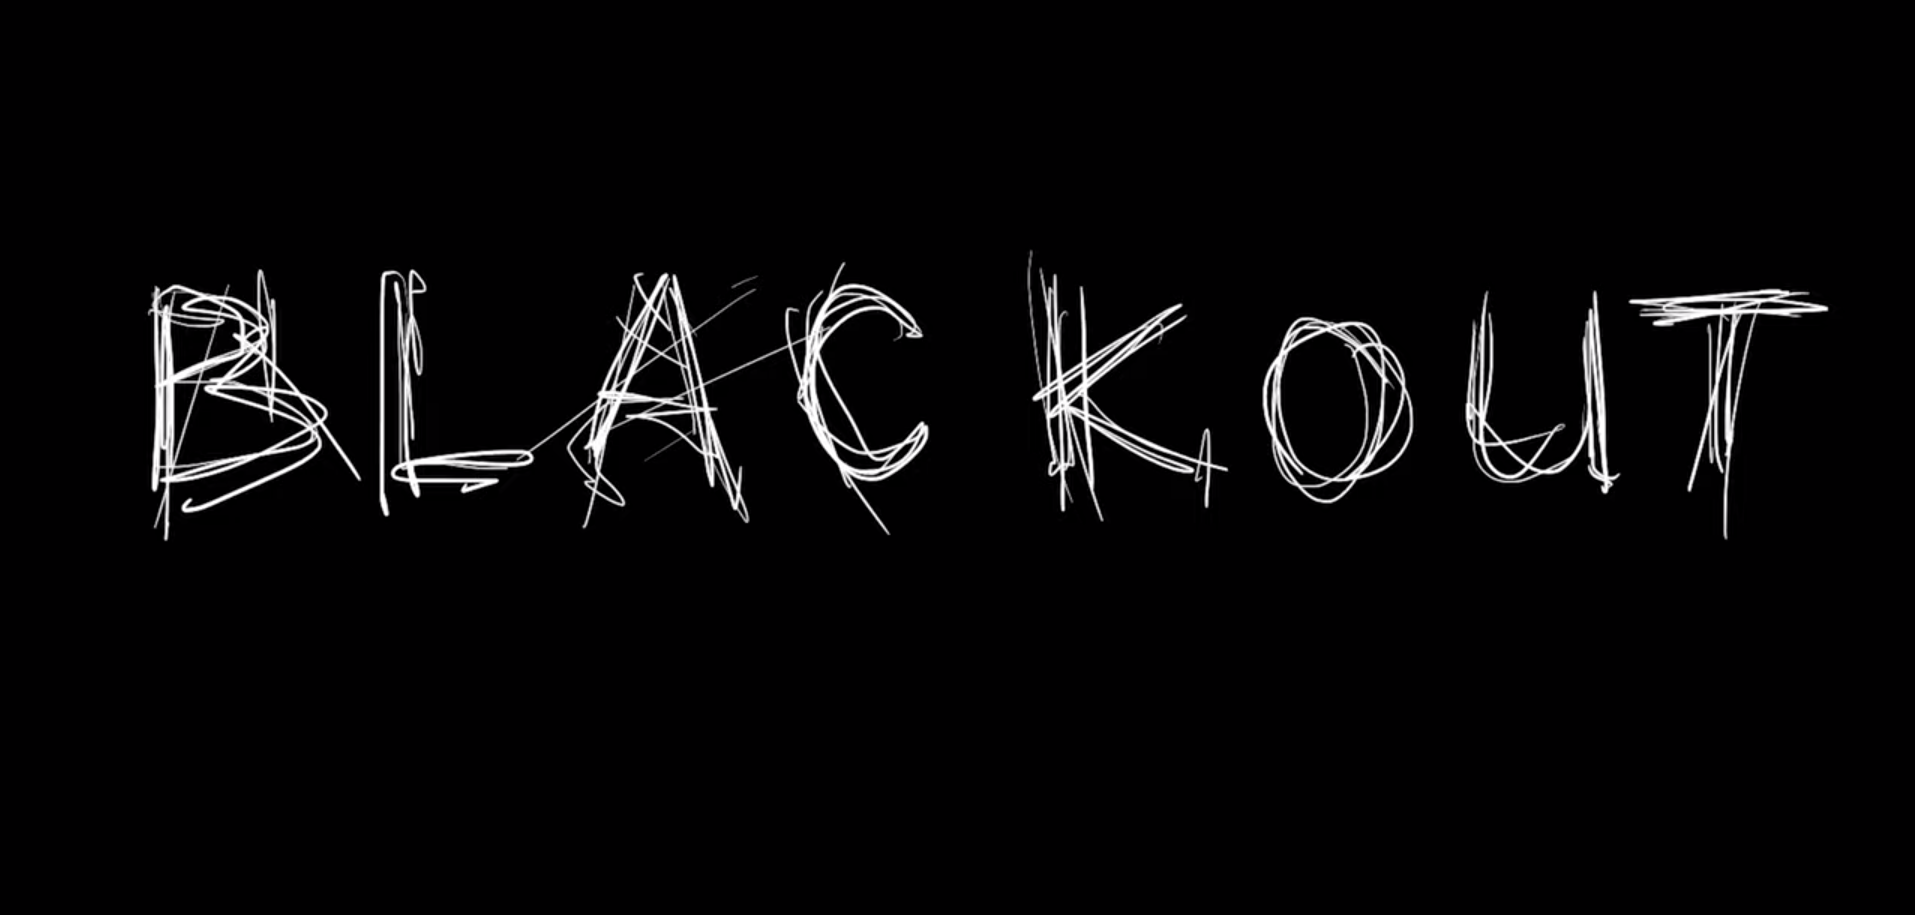 "Blackout", a micro-short documentary, narrated by multiple languages, discusses the safety of women worldwide. Produced and directed by Ugne Jurgaityte, animation by Ruta Stalmokaite.